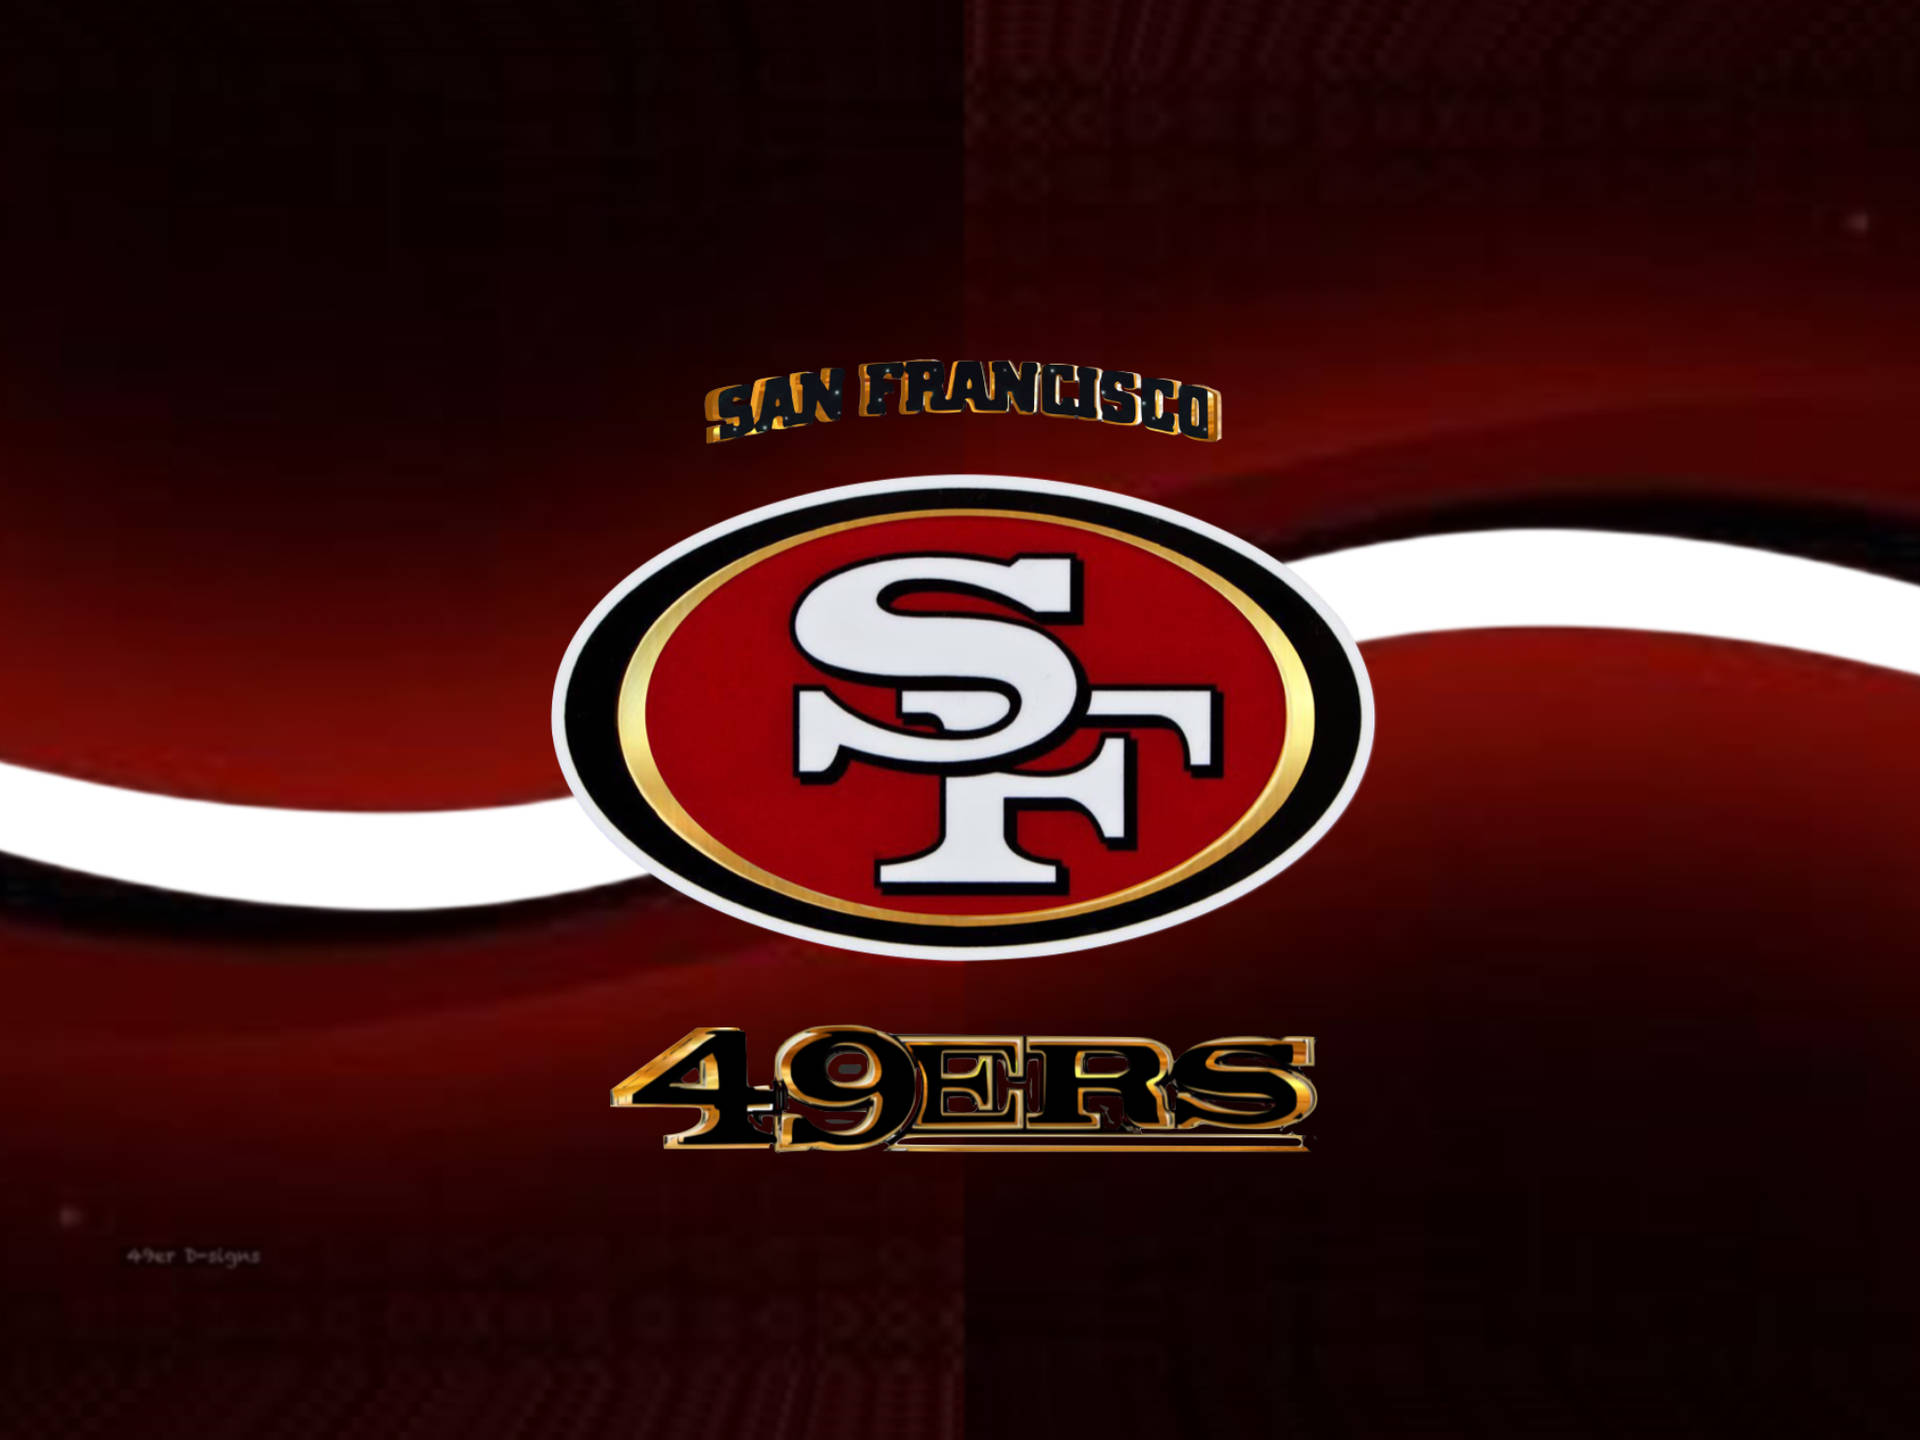 Spirited 49ers Fans Cheering In A Packed Stadium For Their Favorite Team Wallpaper